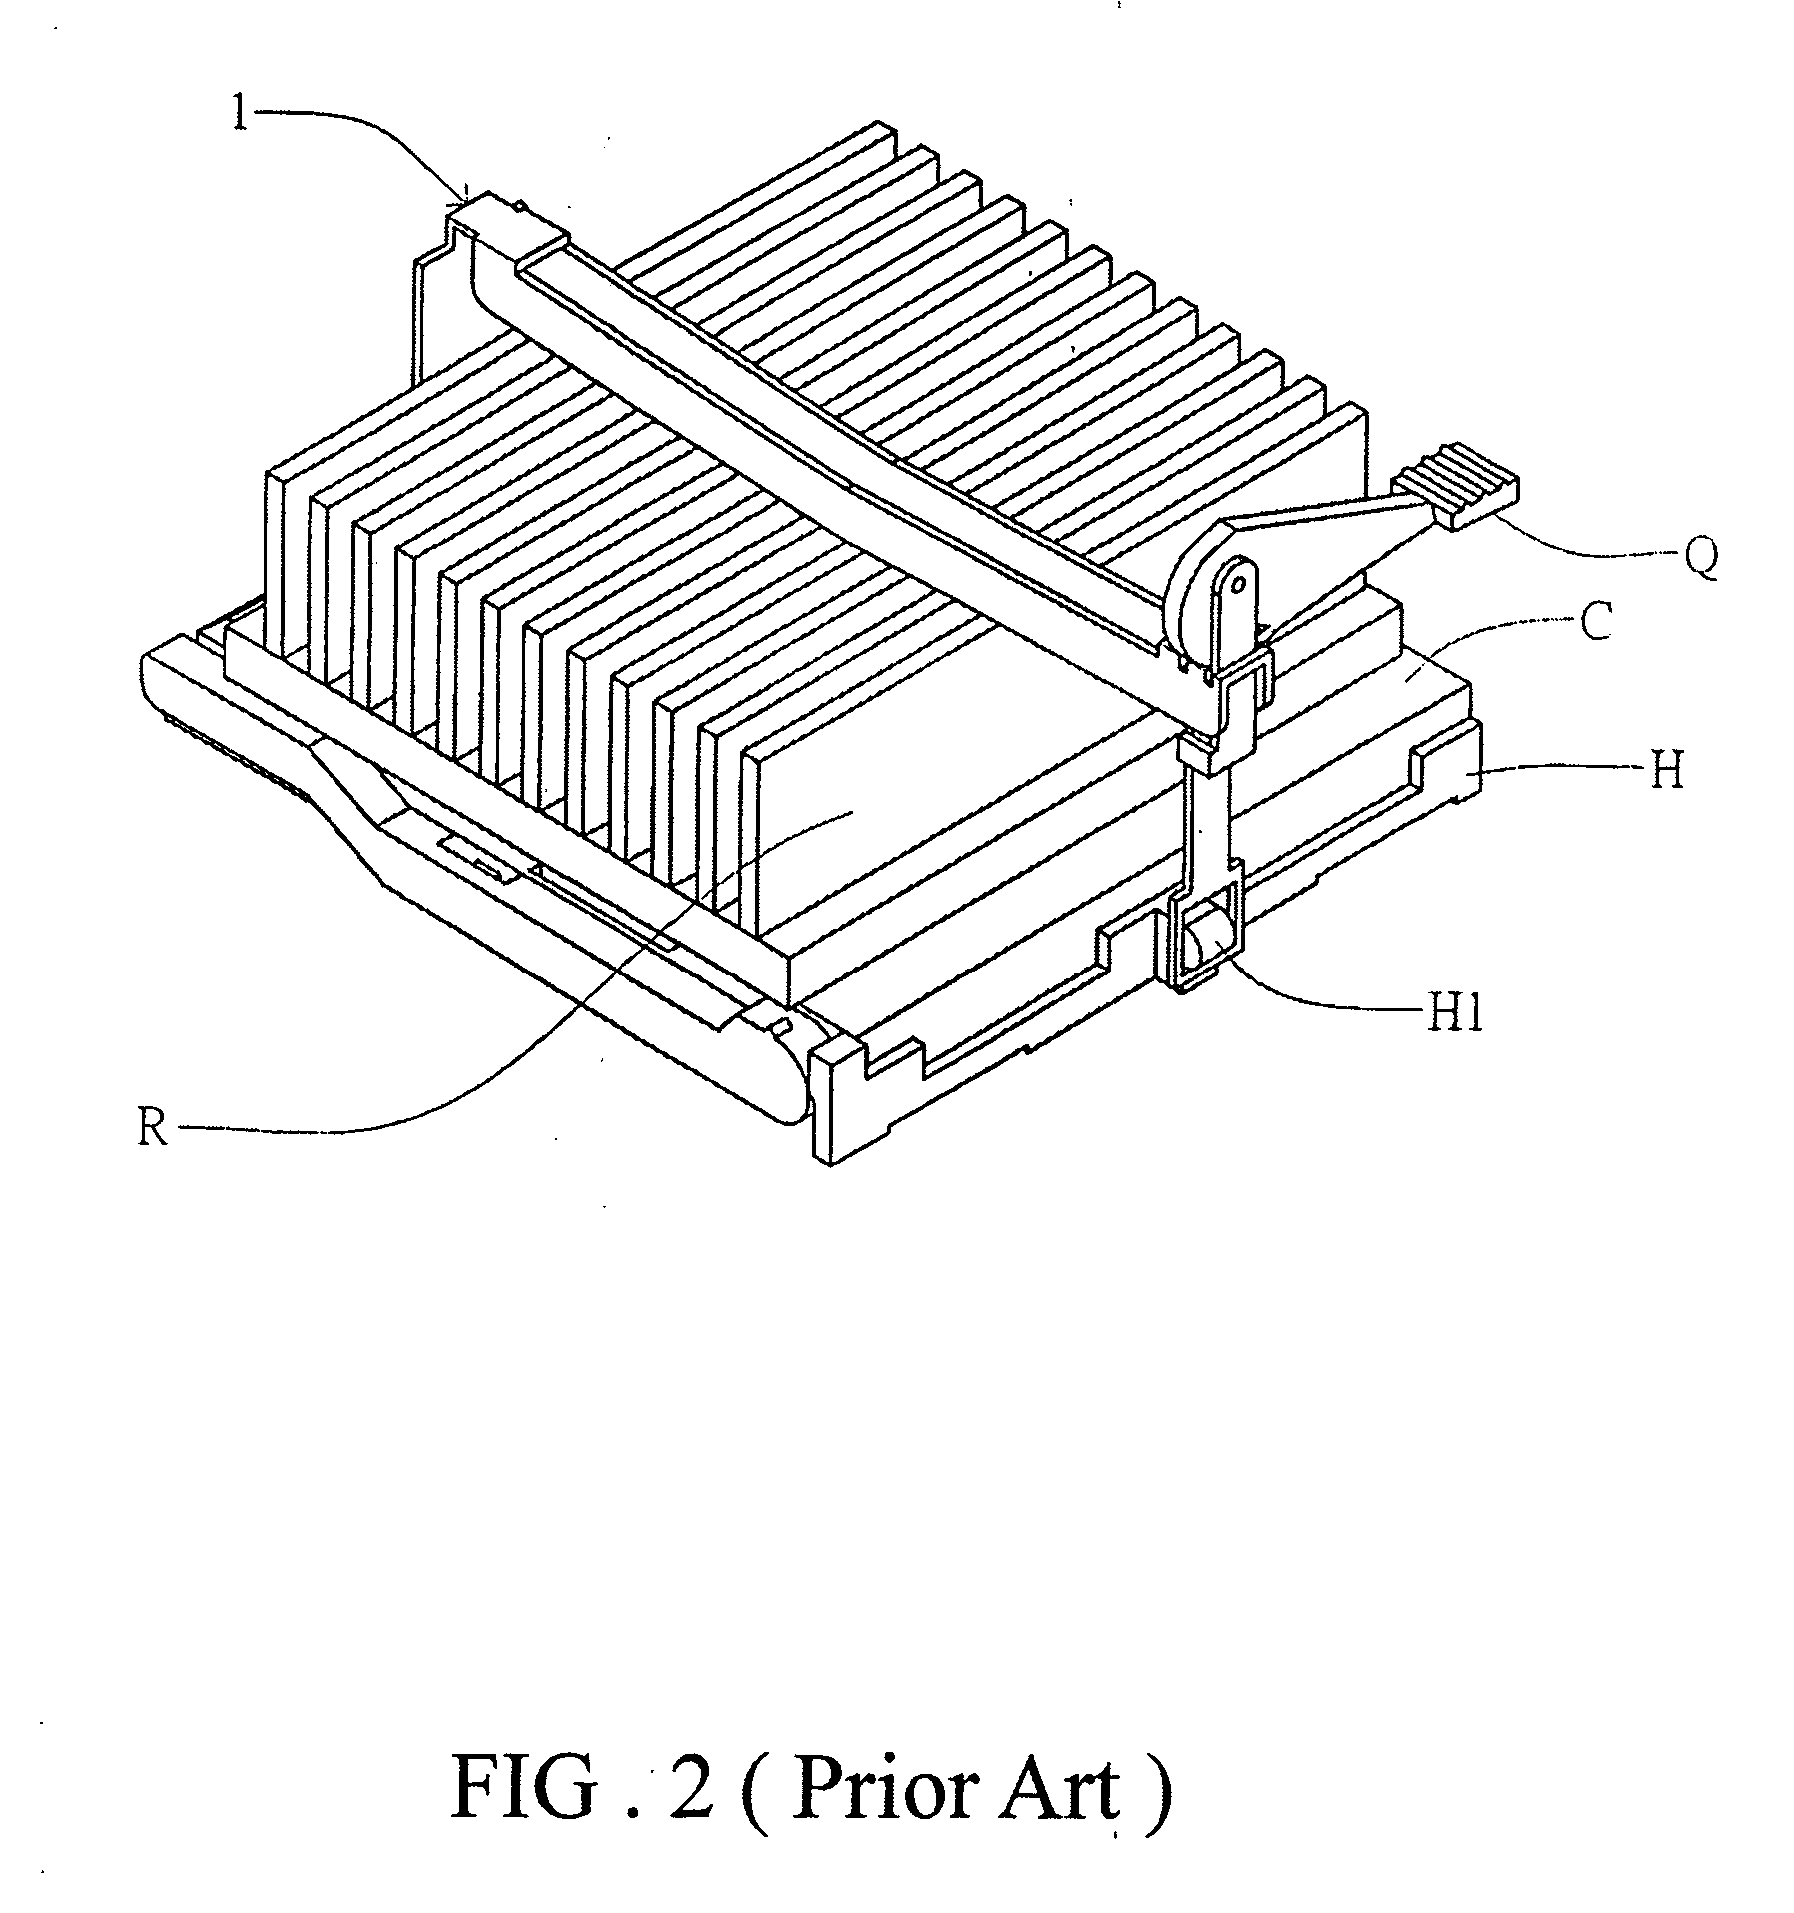 Retaining tool with rotational locating device